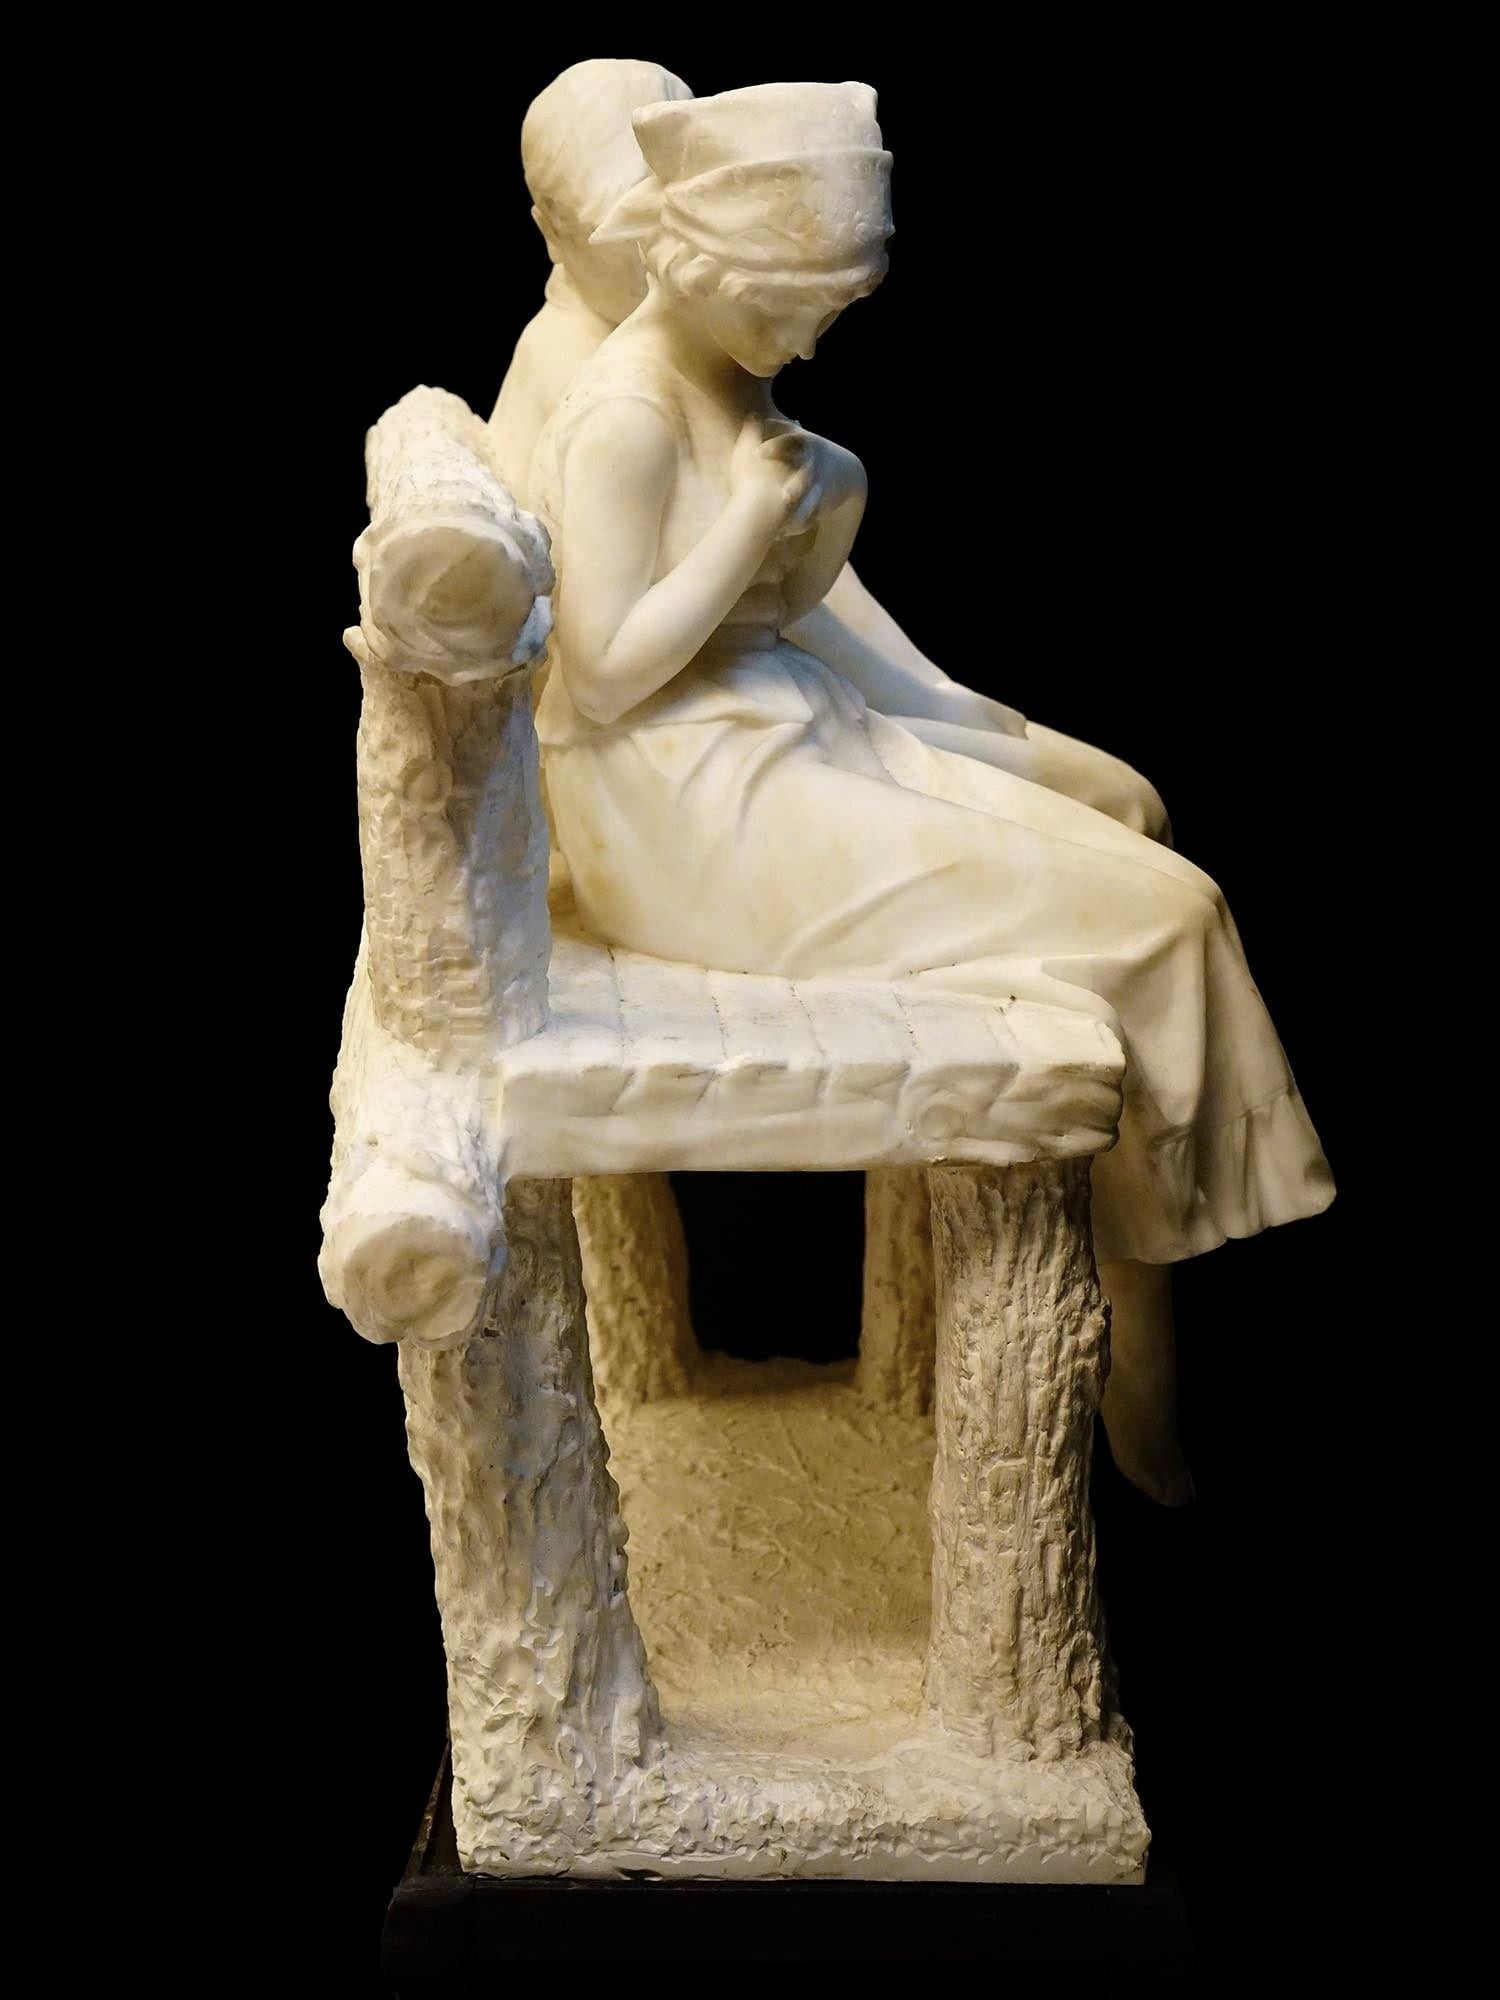 Fine alabaster sculpture of a young couple seated on a bench, attributed to the Italian master, Umberto Stiaccini, active in the late 19th to early 20th century.
Apparently unsigned.  26 x 22 x 14 1/2 inches.